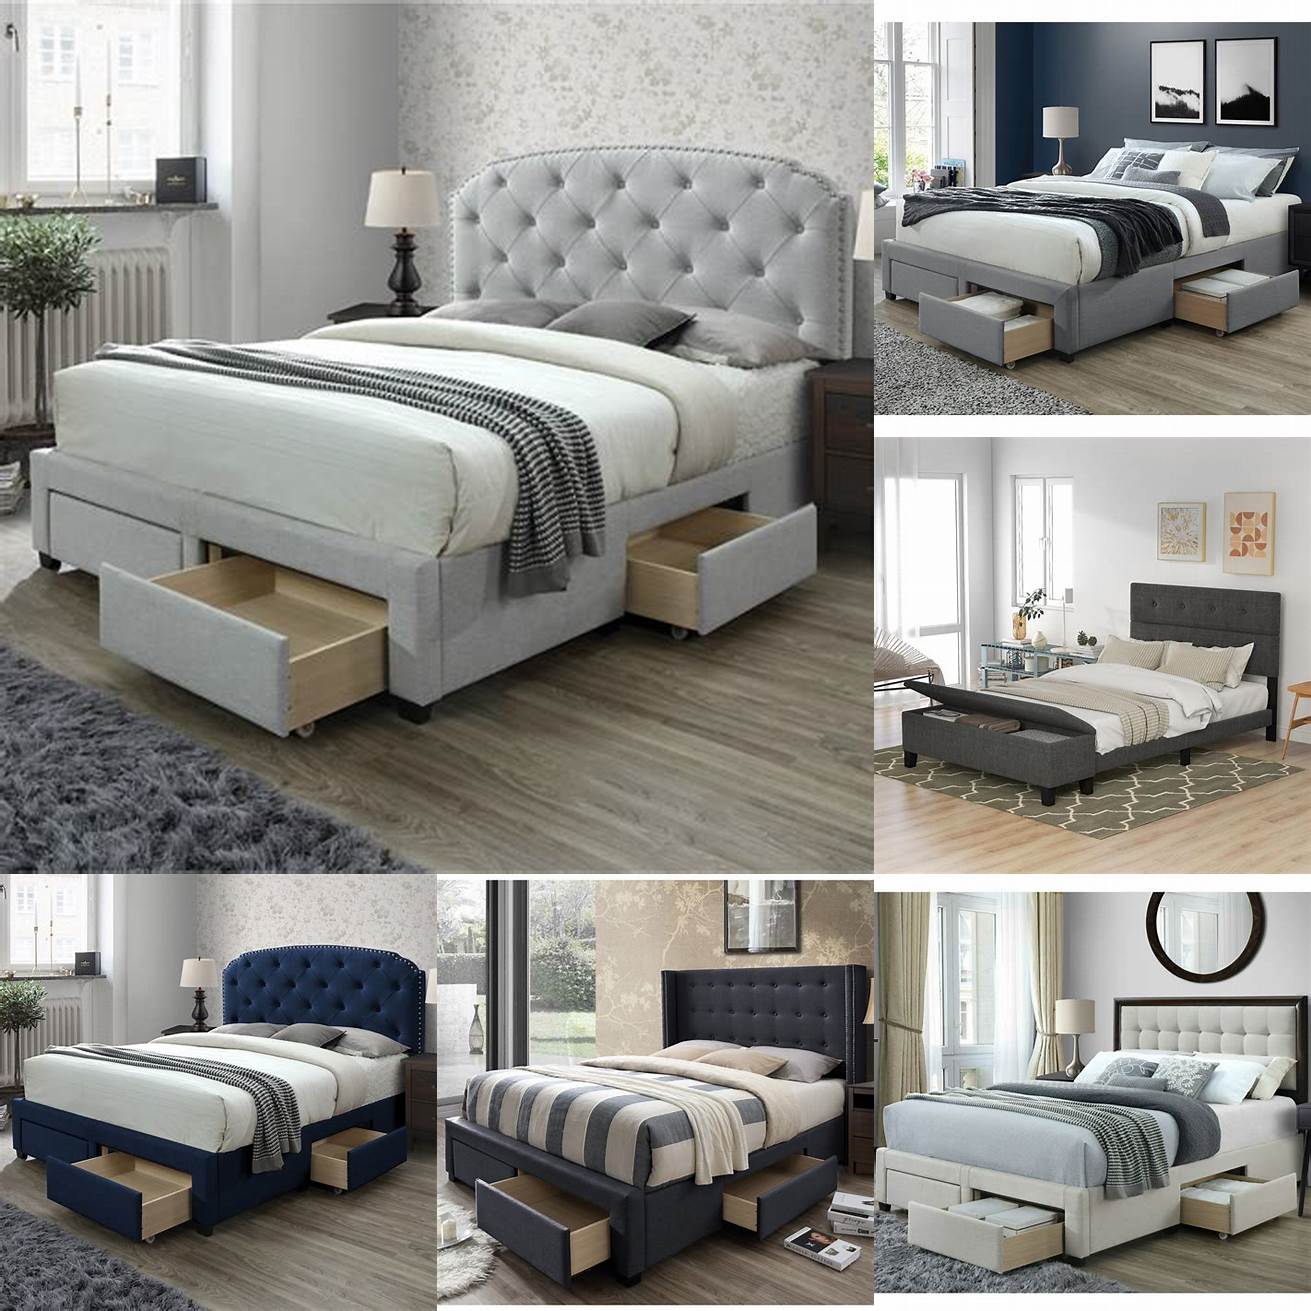 Image of a Queen Size Bed with Fabric Storage Compartments